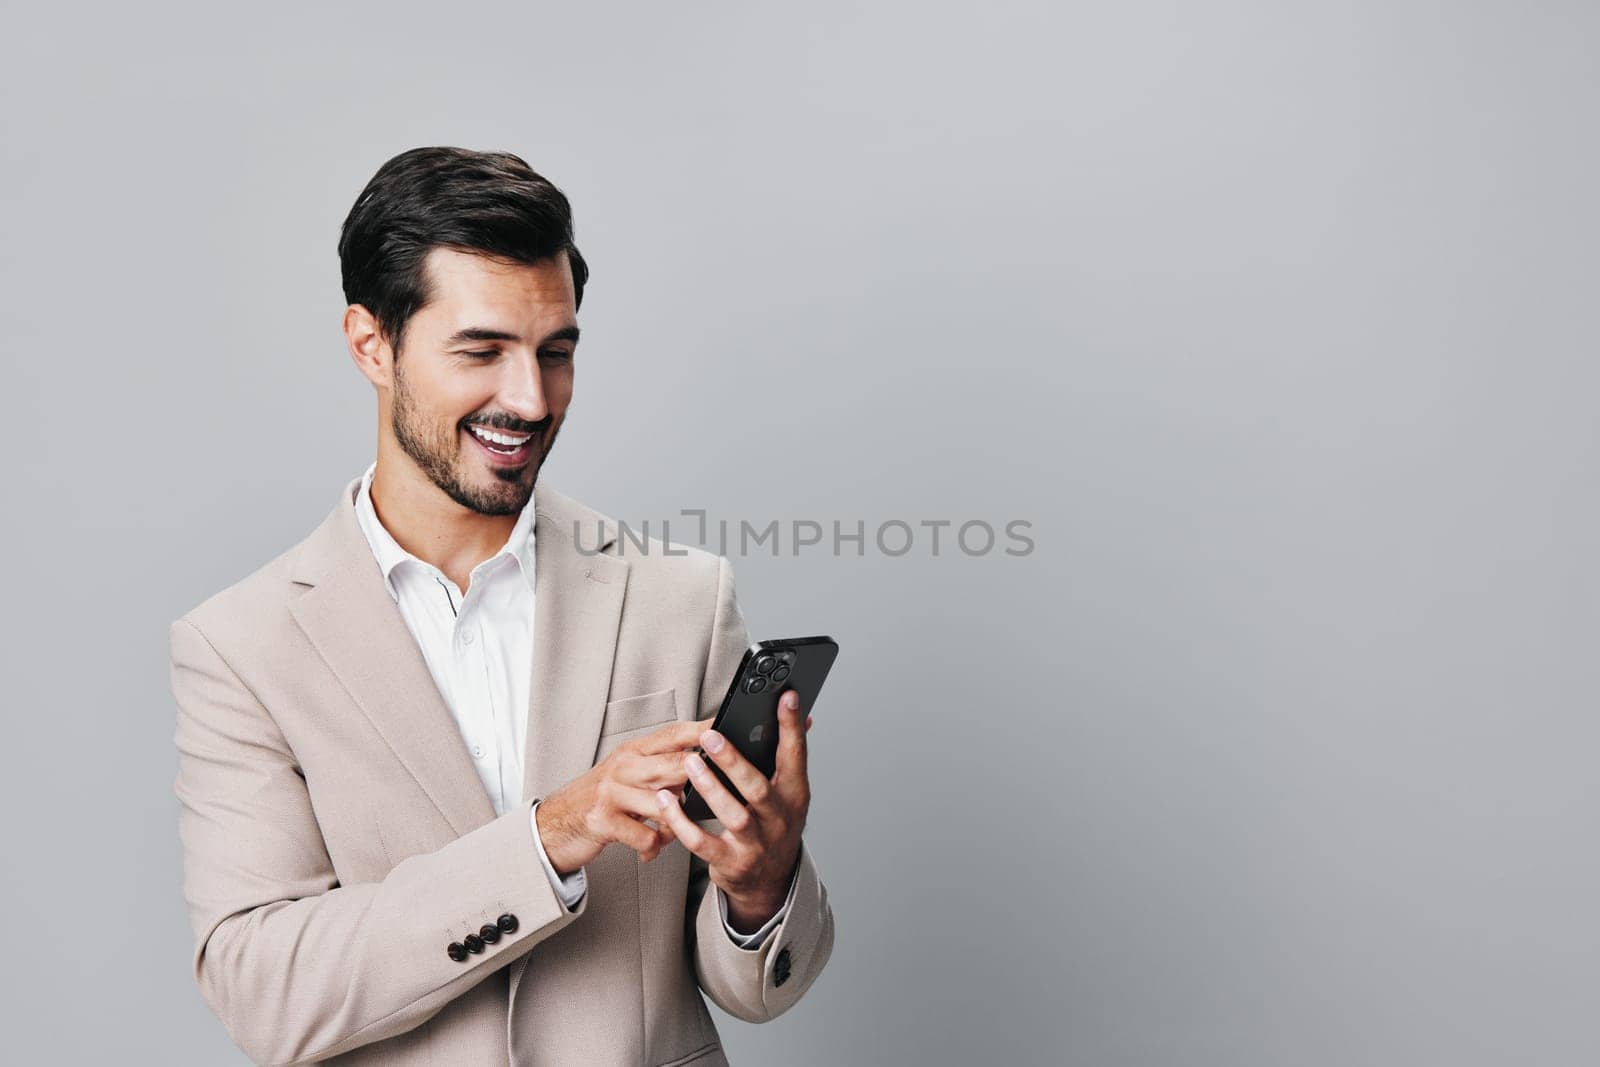 hold man call business phone selfies suit portrait happy smile smartphone by SHOTPRIME